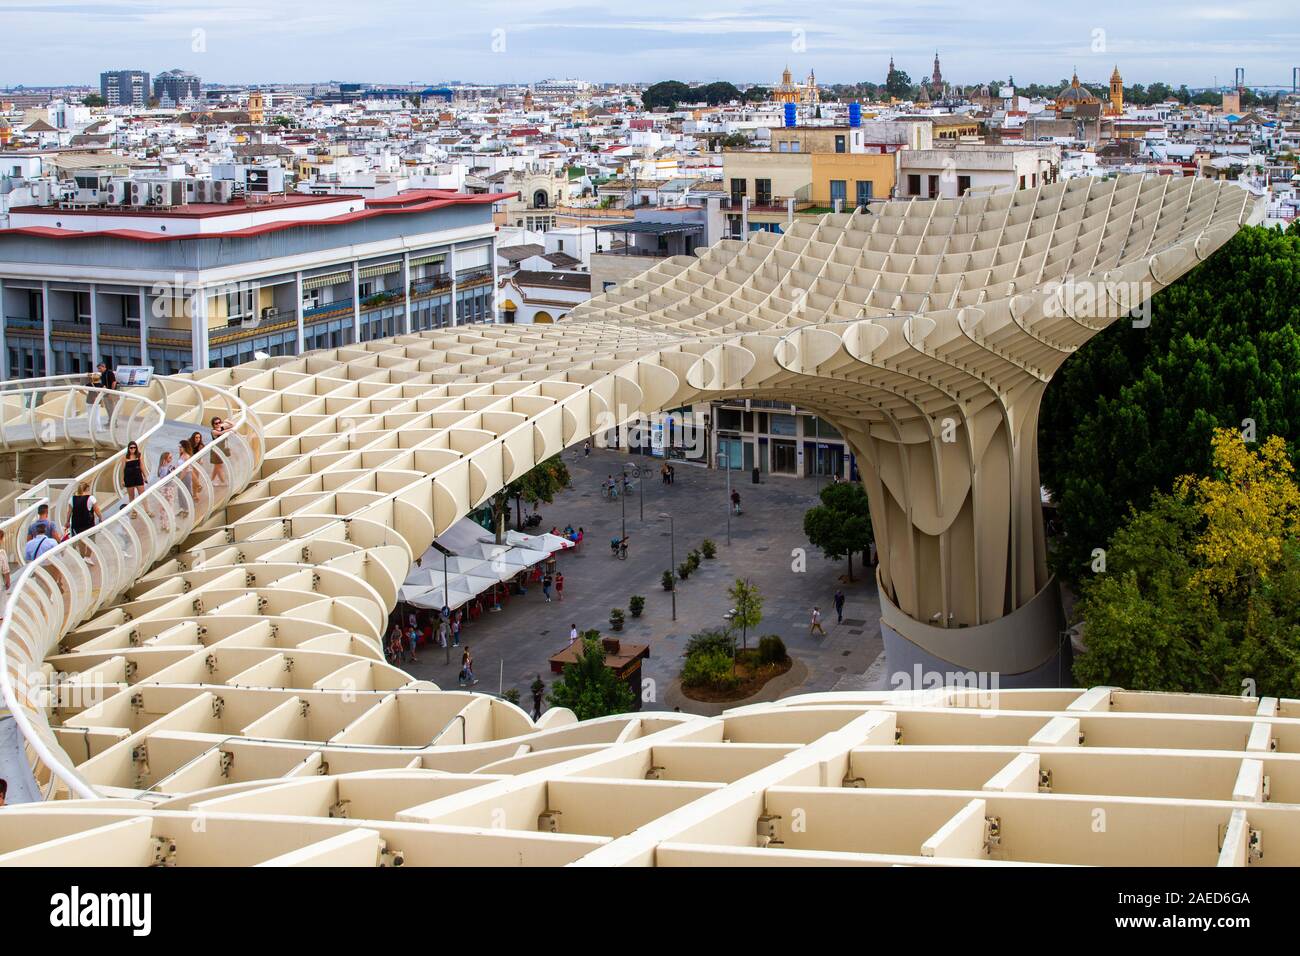 Extra muros - Page 3 Sevilla-spain-september-21-view-of-sevilla-mushrooms-also-known-as-metropol-parasol-project-by-architect-jrgen-mayer-the-largest-wood-struc-2AED6GA